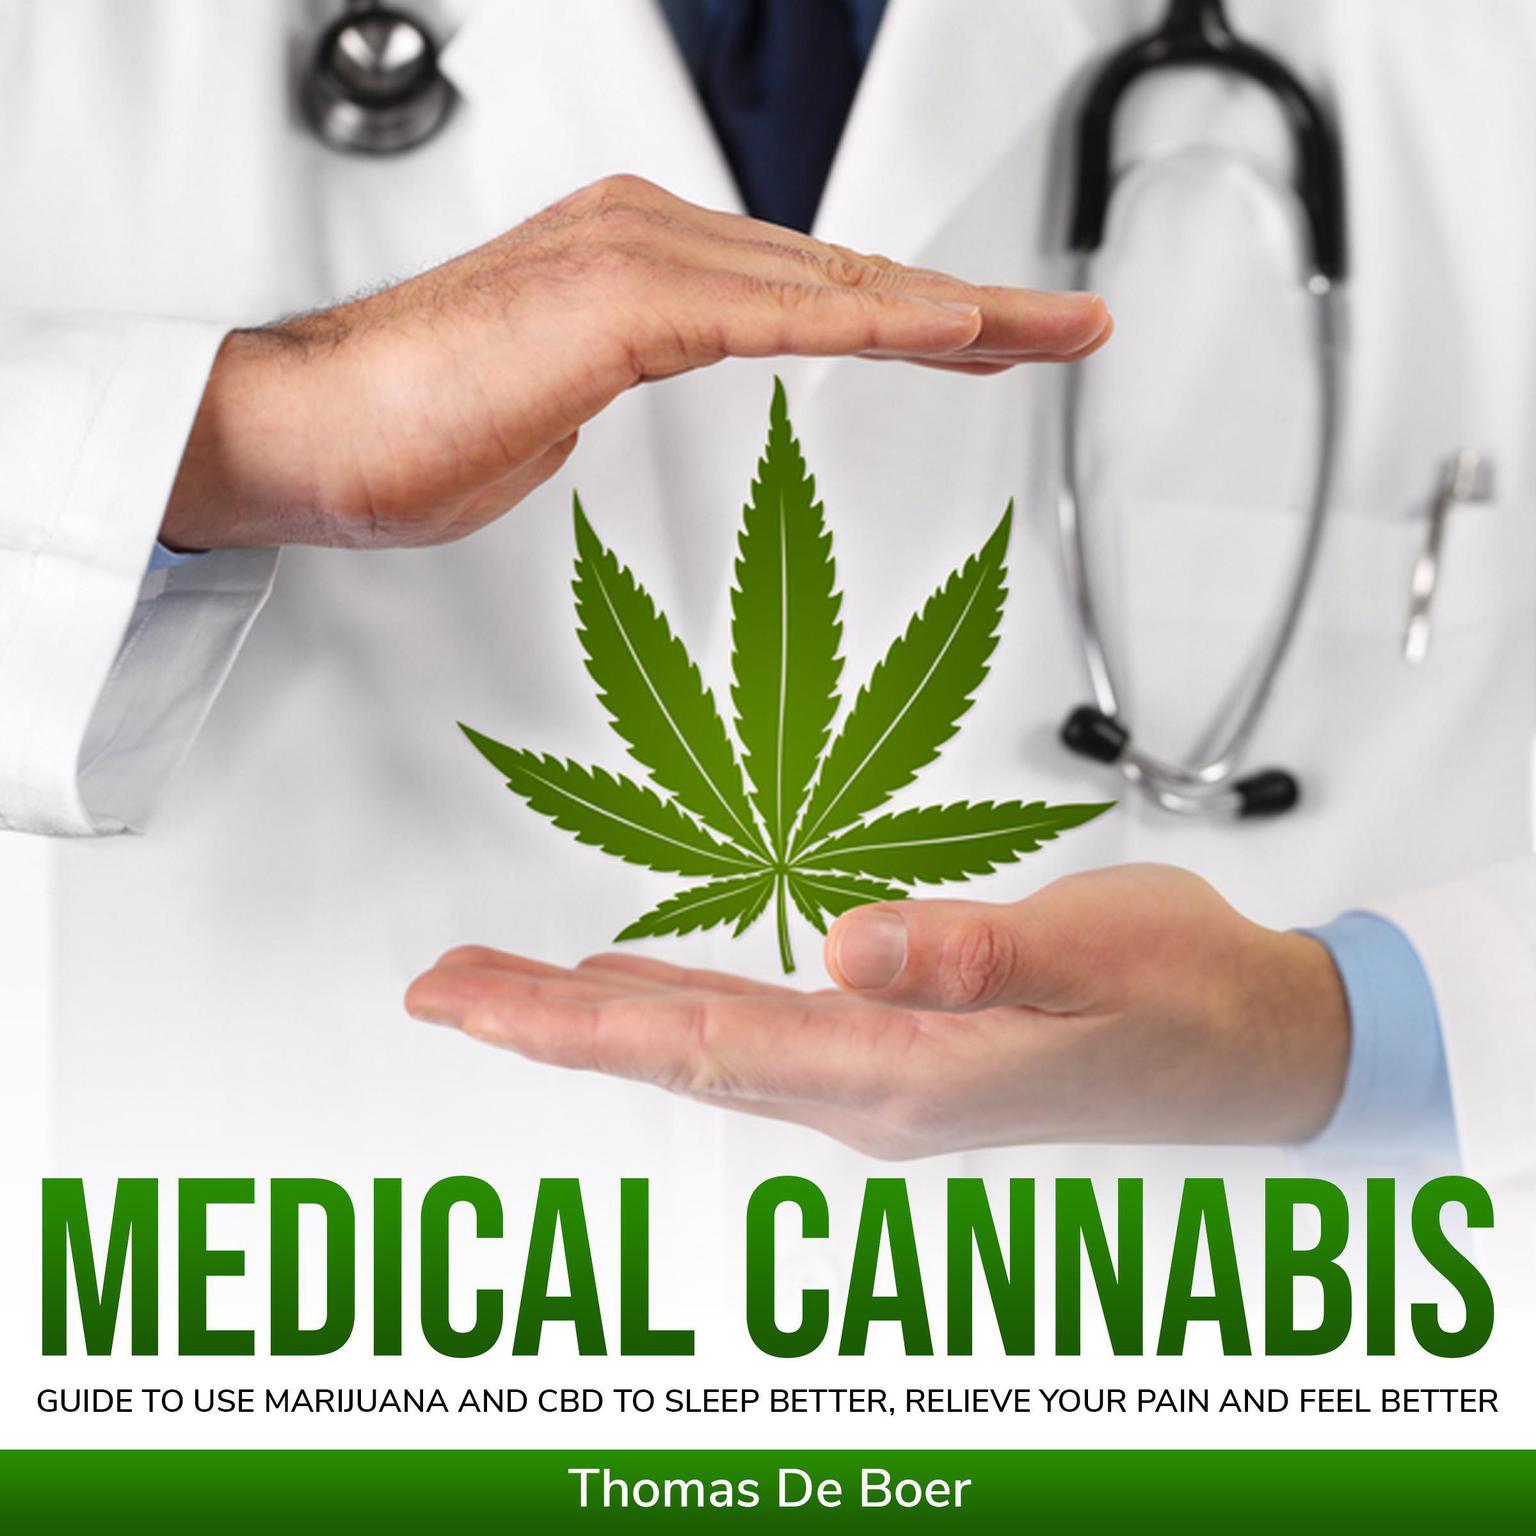 MEDICAL CANNABIS: Guide to Use Marijuana and CBD to Sleep Better, Relieve Your Pain and Feel Better Audiobook, by Thomas De Boer